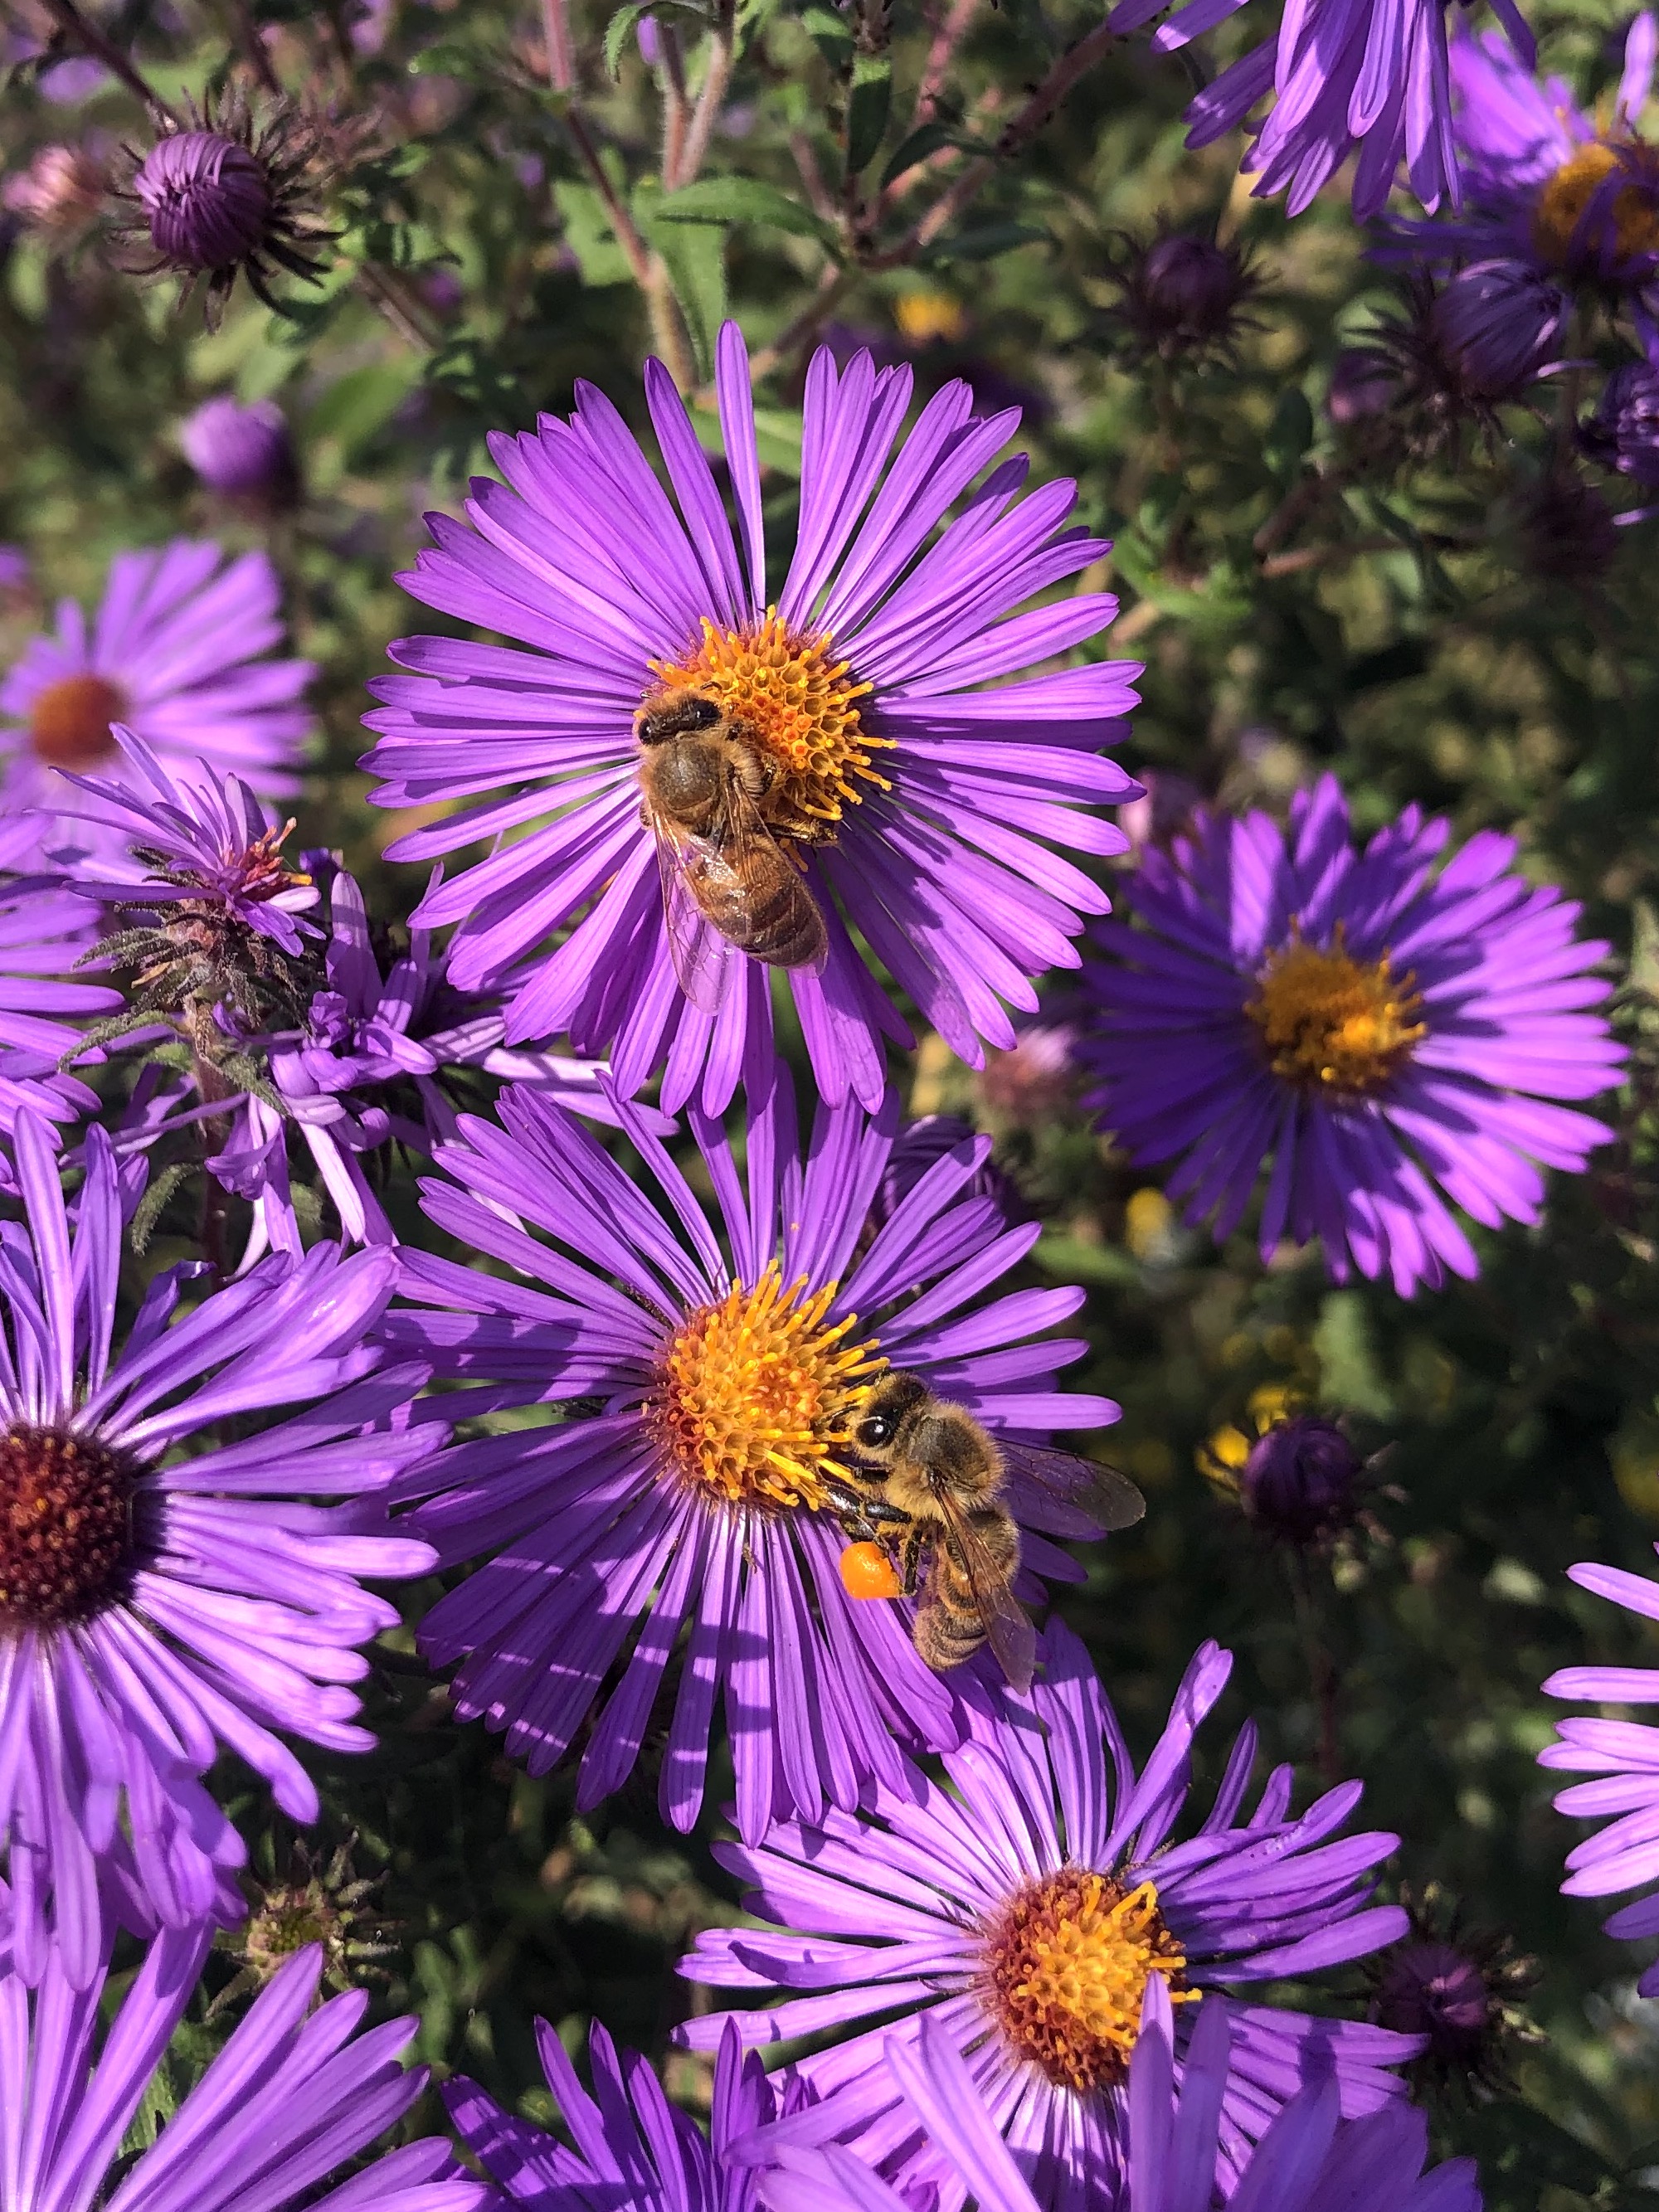 New England Aster on shore of Vilas Park Lagoon in Madison, Wisconsin on October 19, 2021.